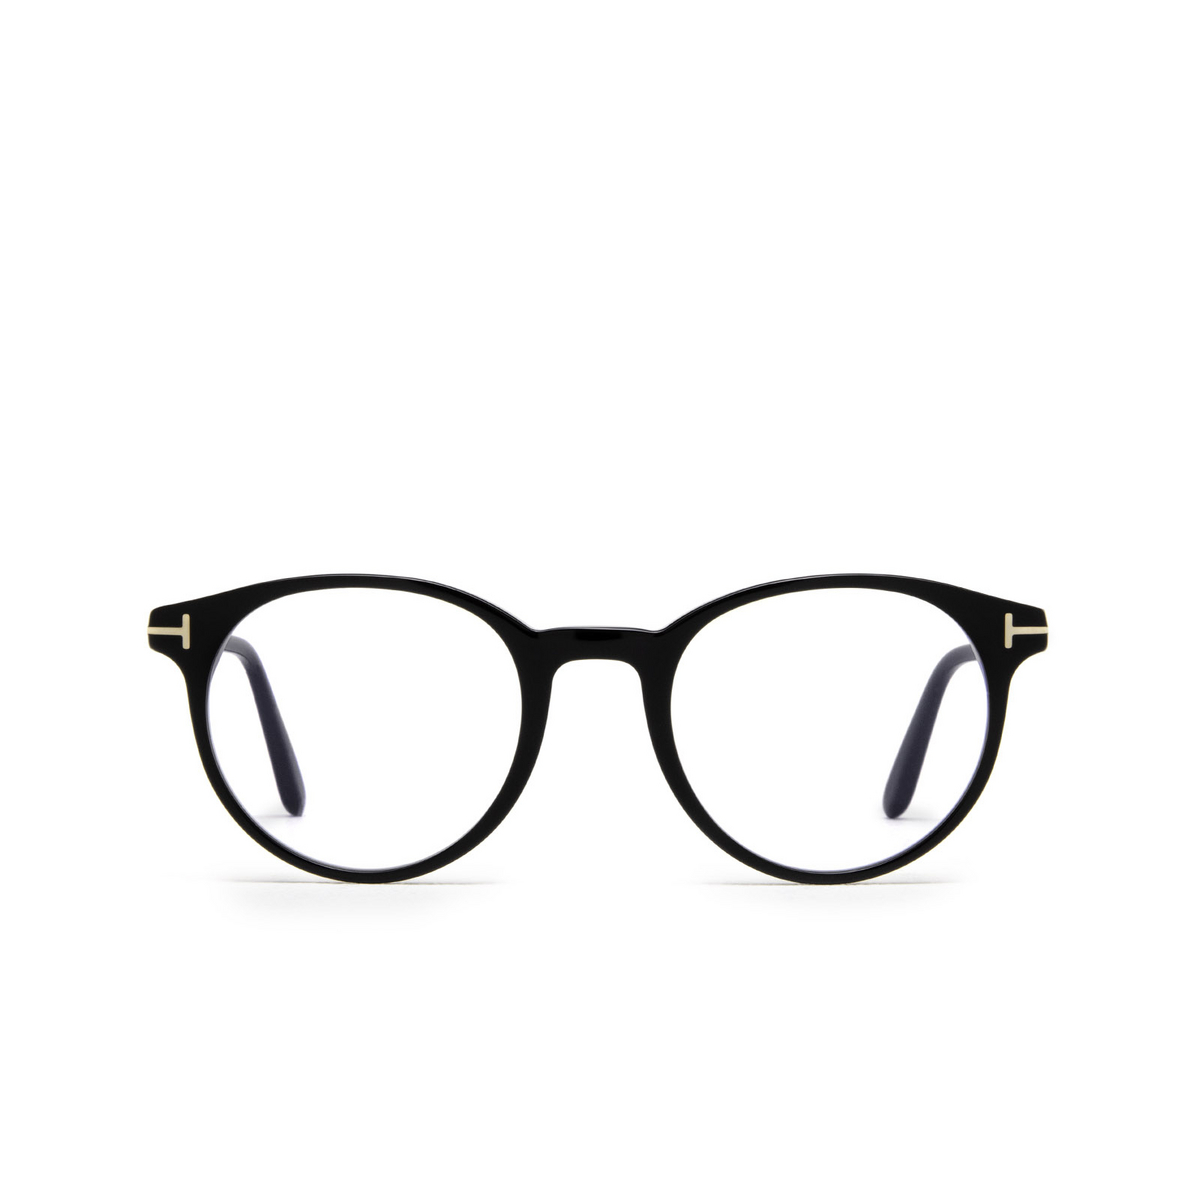 Tom Ford® Round Eyeglasses: FT5695-B color 001 Black - front view